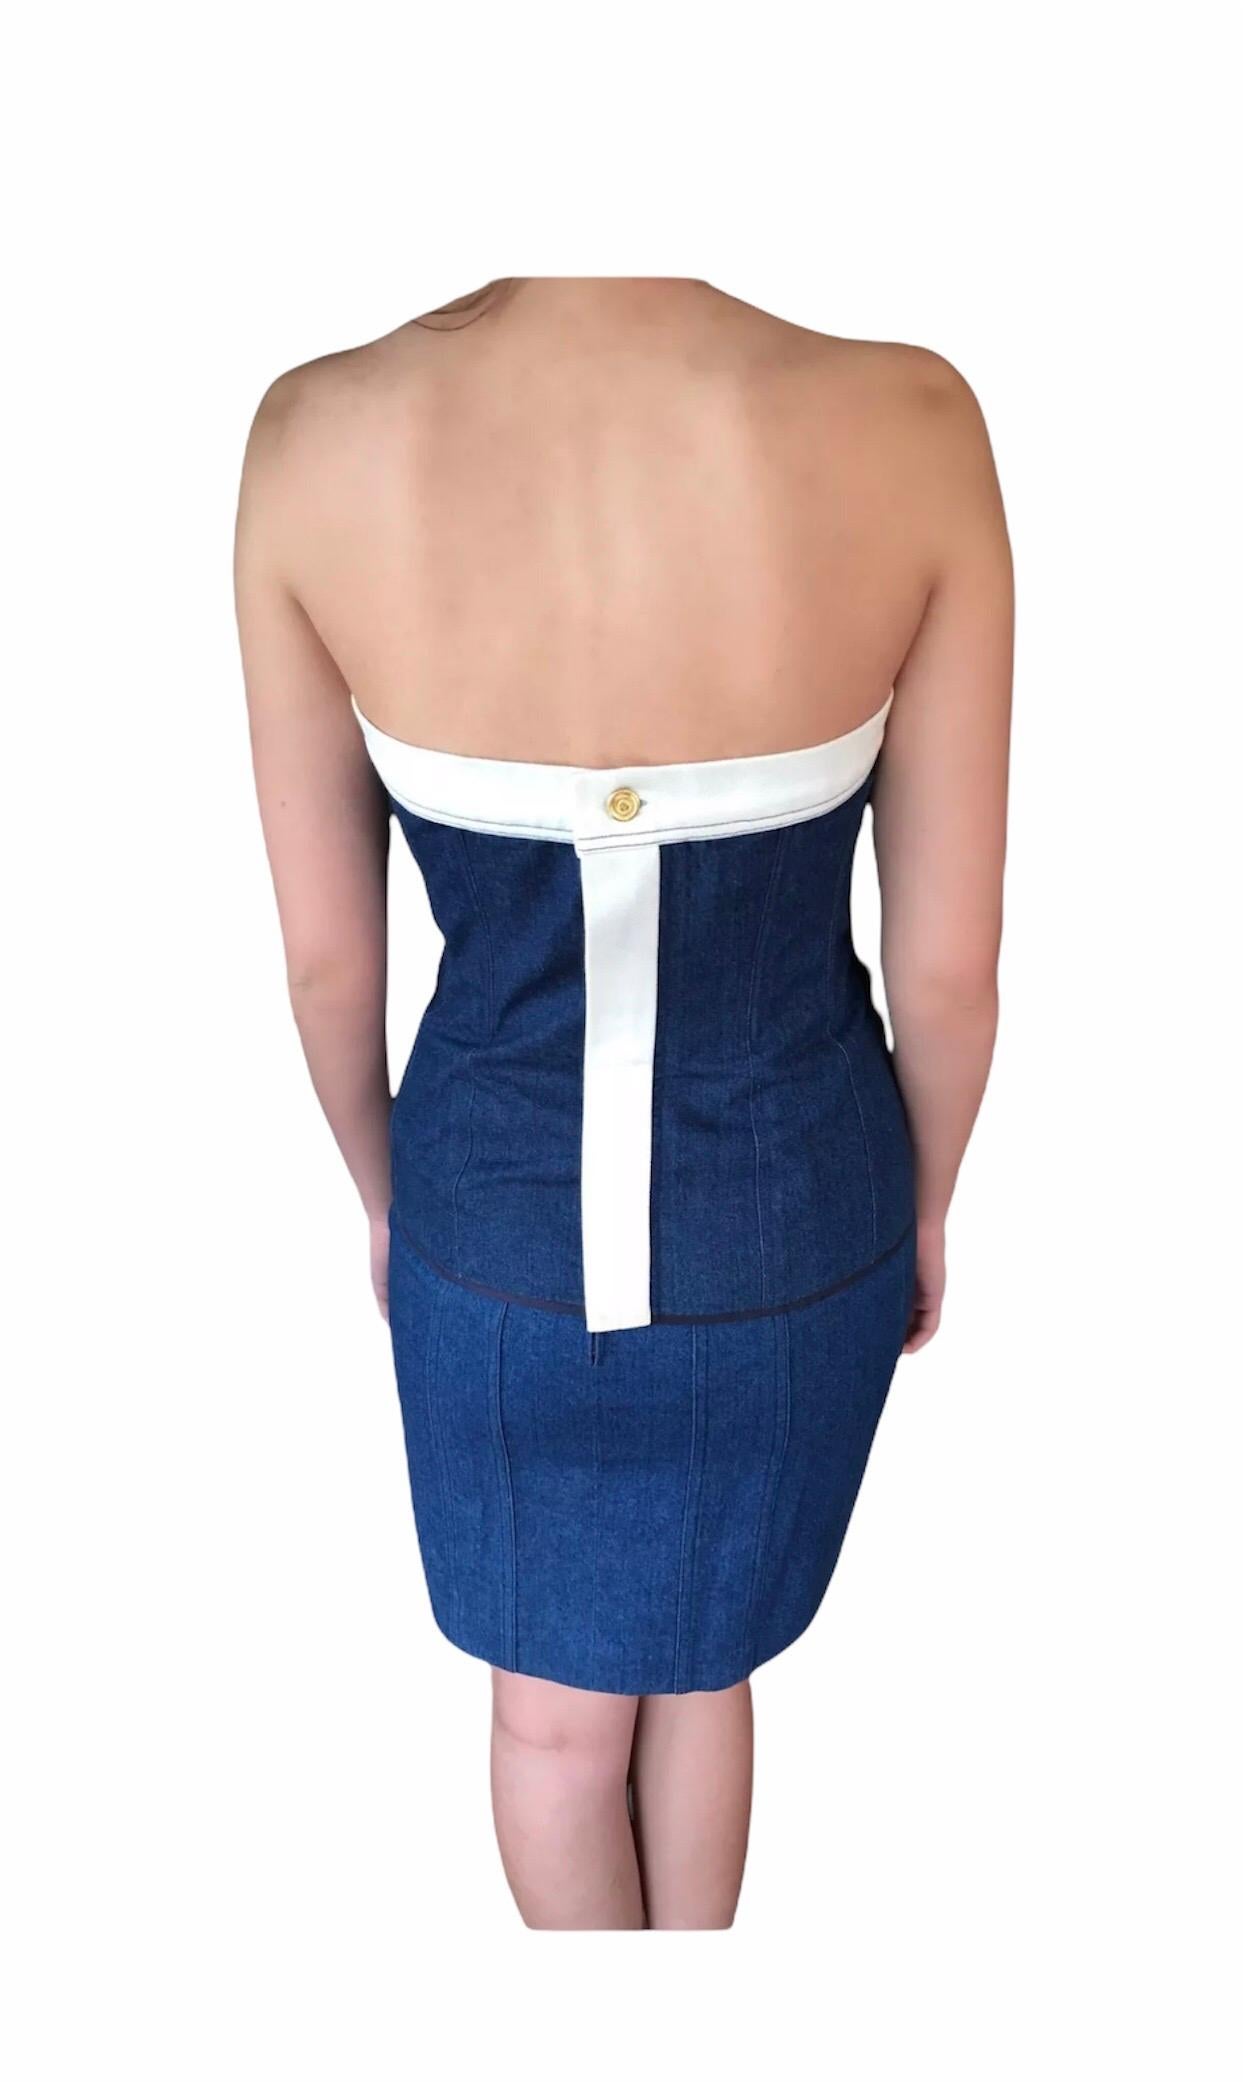 Chanel Vintage 1990's Denim Mini Skirt and White Trim Corset Top 2 Piece Set Ensemble

Please note the tag is illegible due to age.